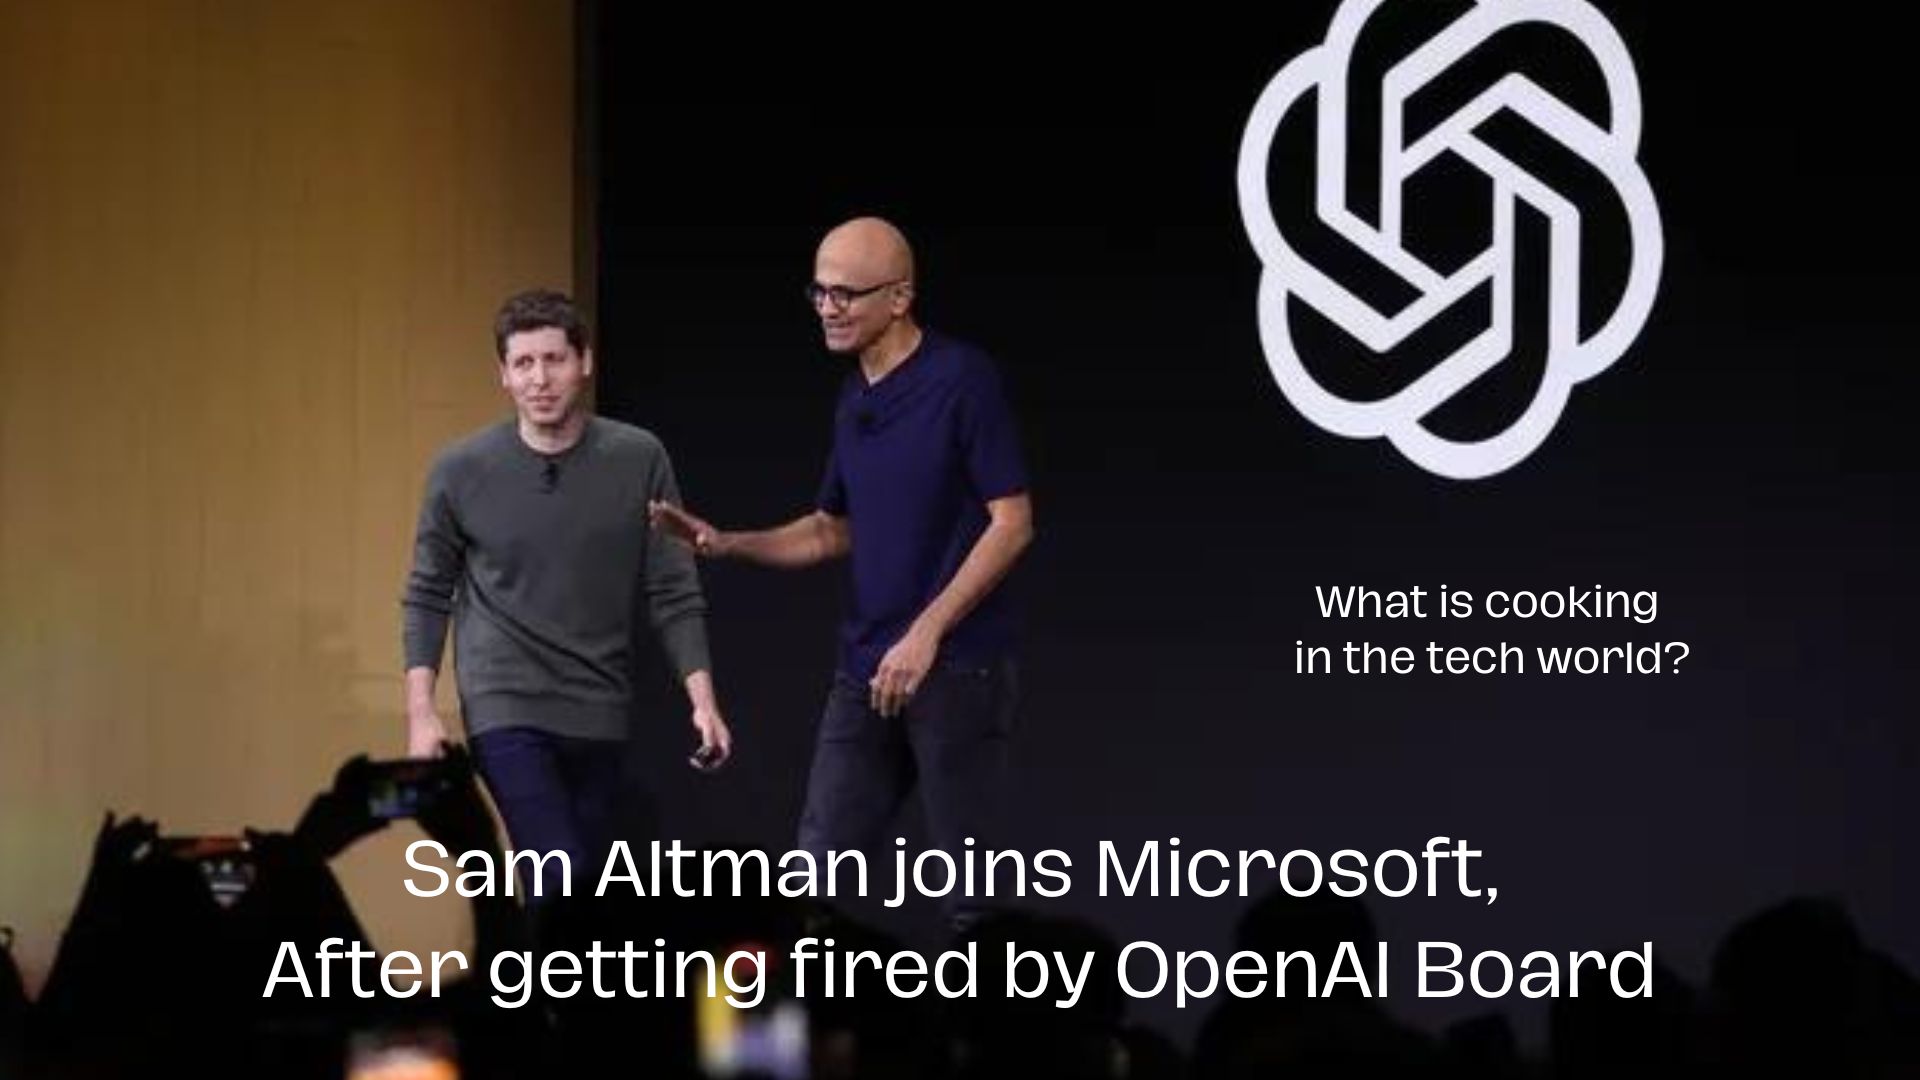 Sam Altman joins Microsoft After getting fired by Open AI Board